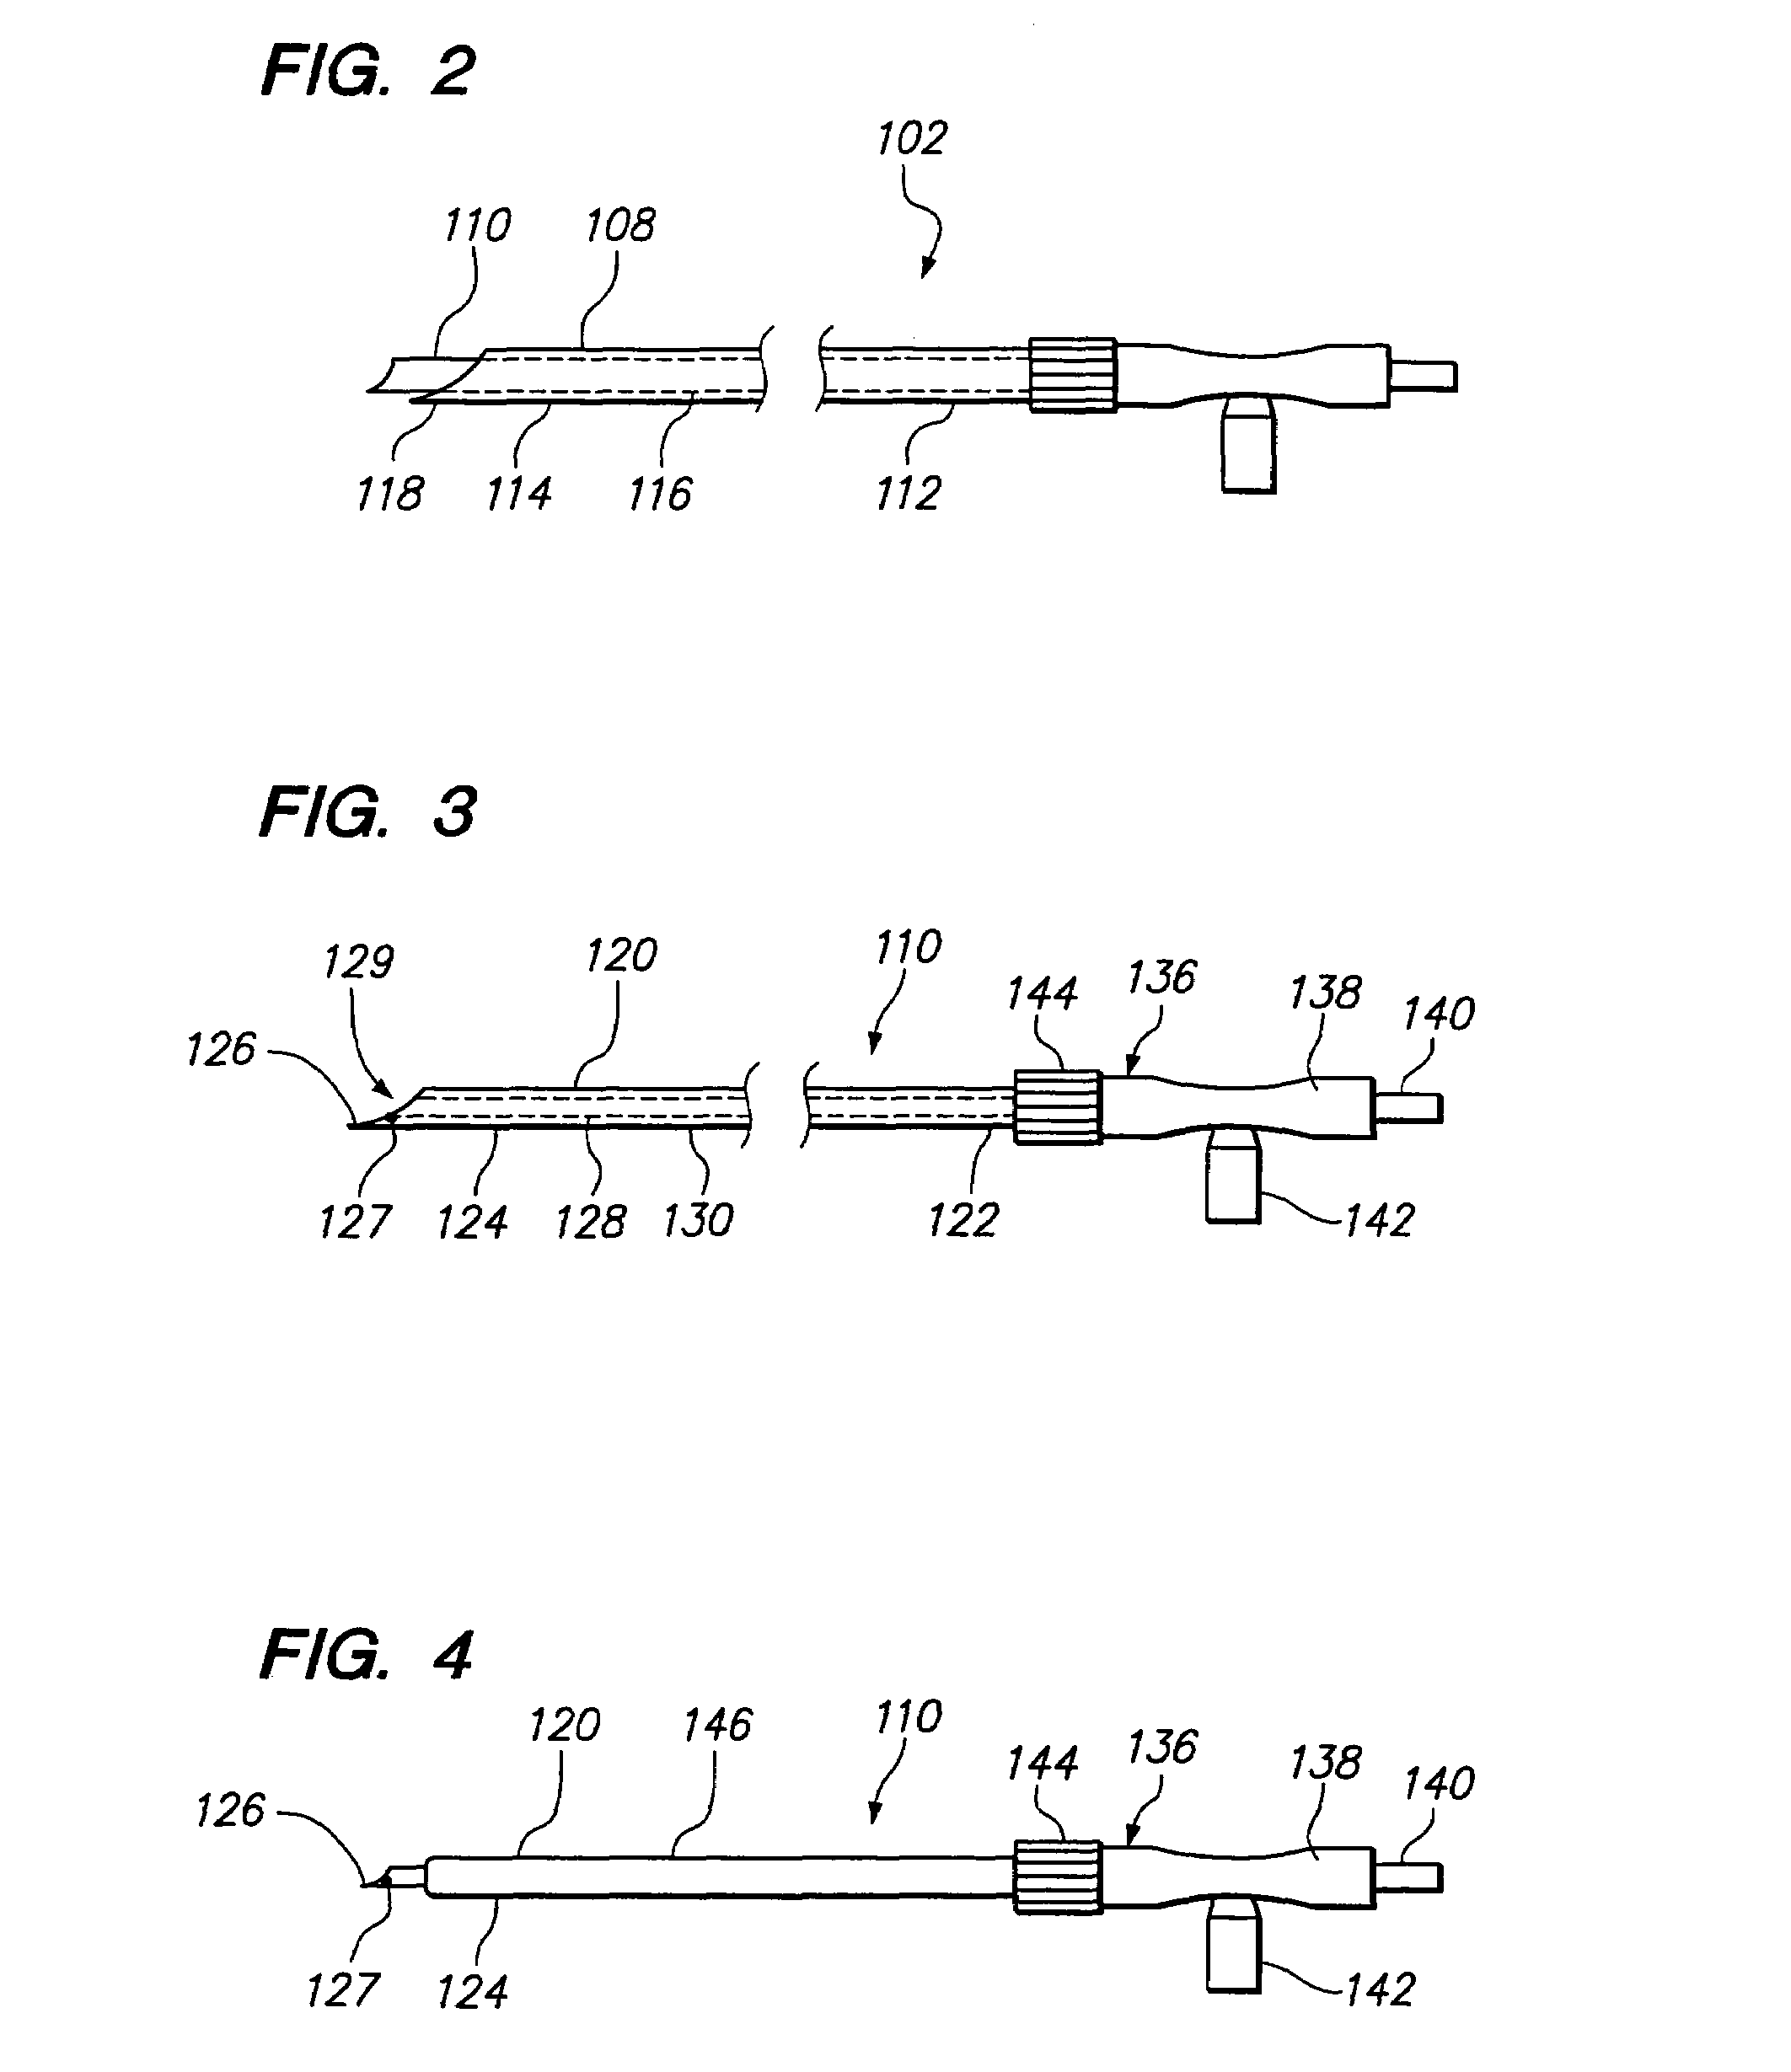 Tissue treatment system and method for tissue perfusion using feedback control